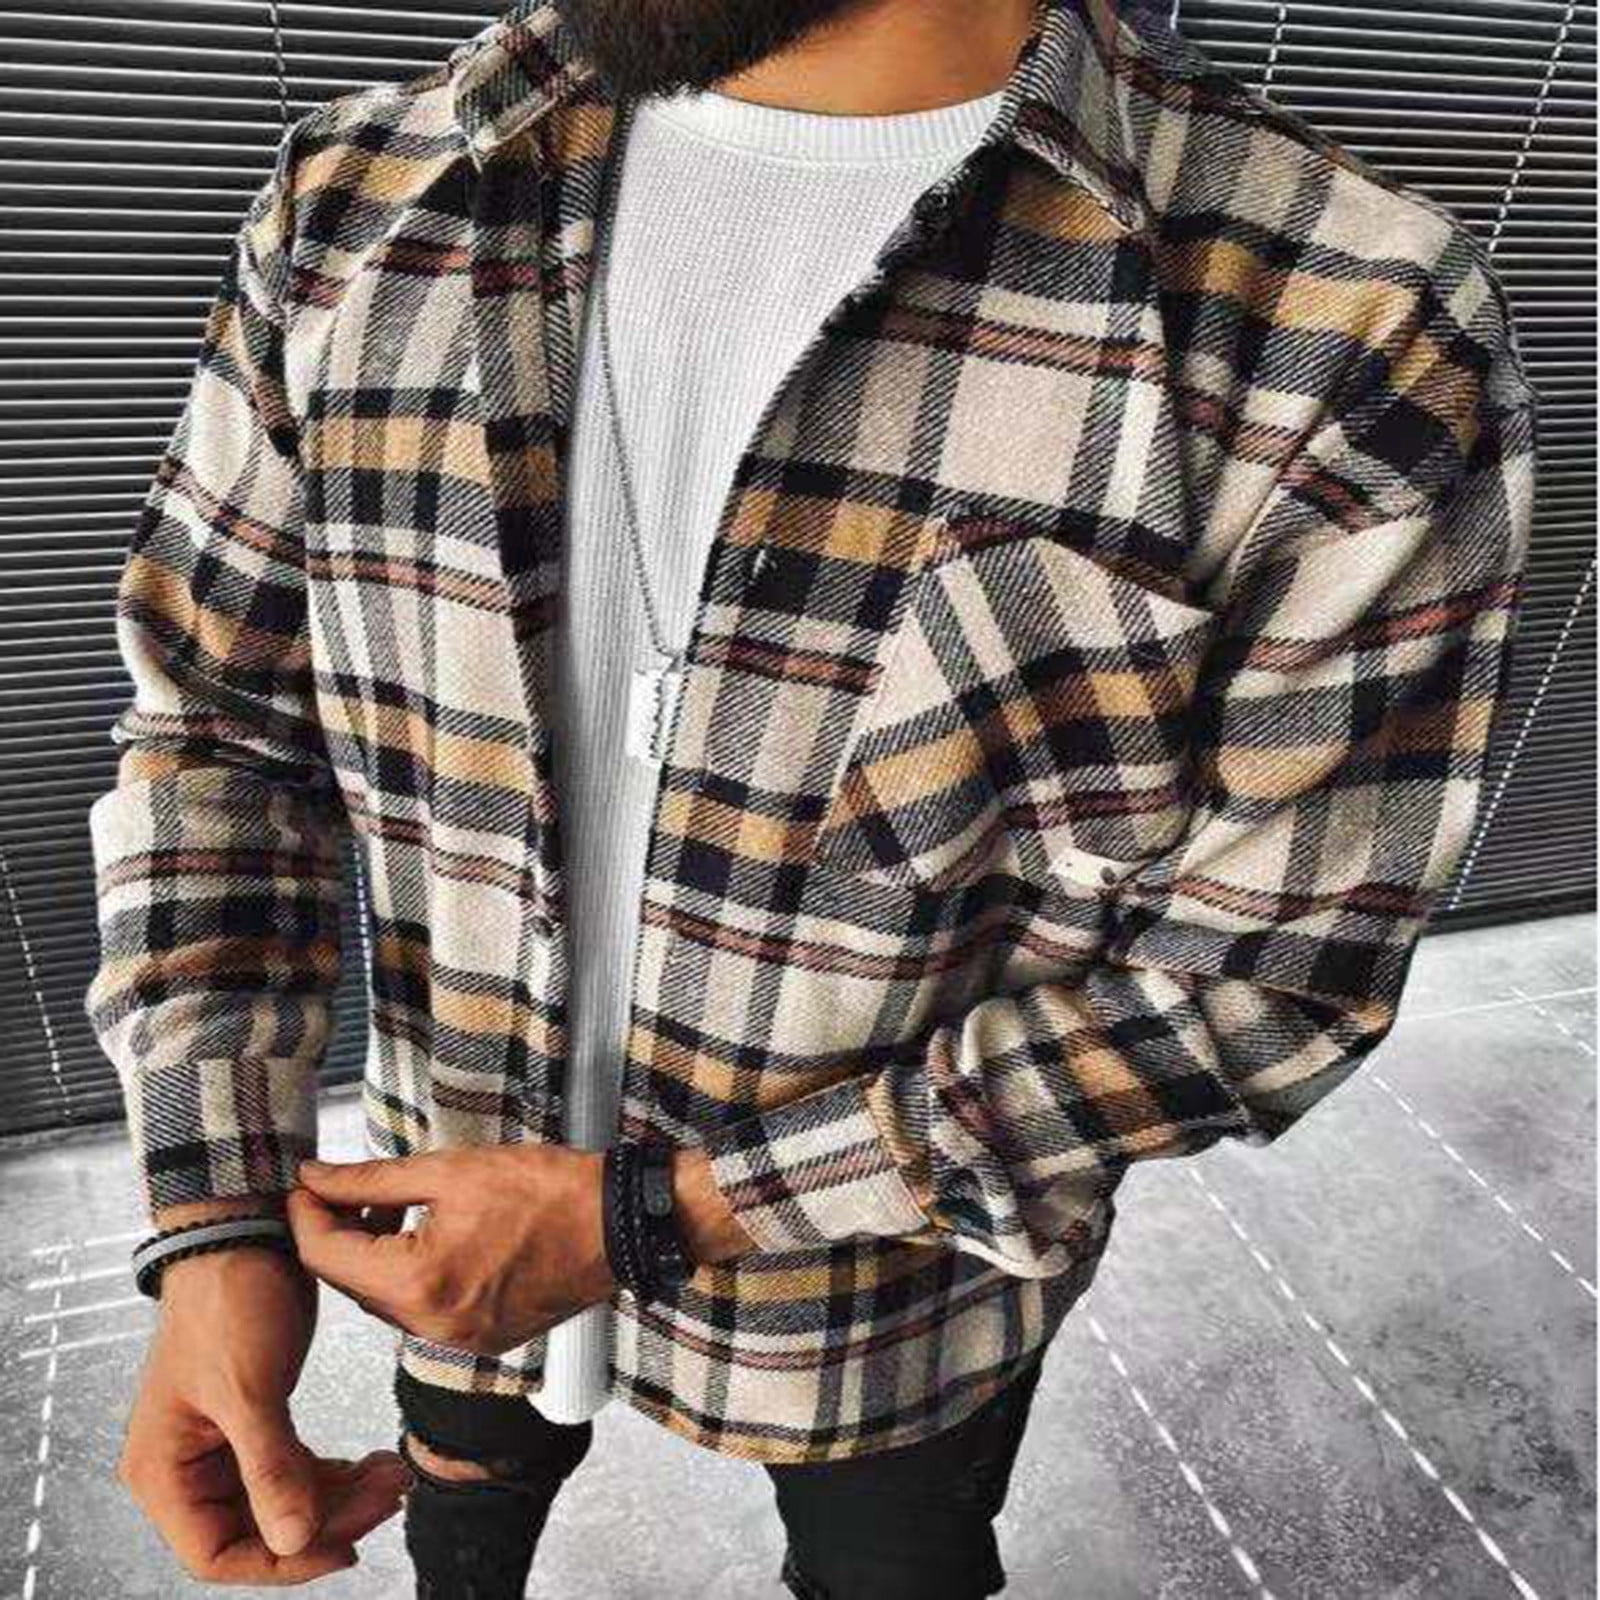 ZZWXWB Jackets for Men Men's Single-breasted Casual Plaid Woolen Shirt ...